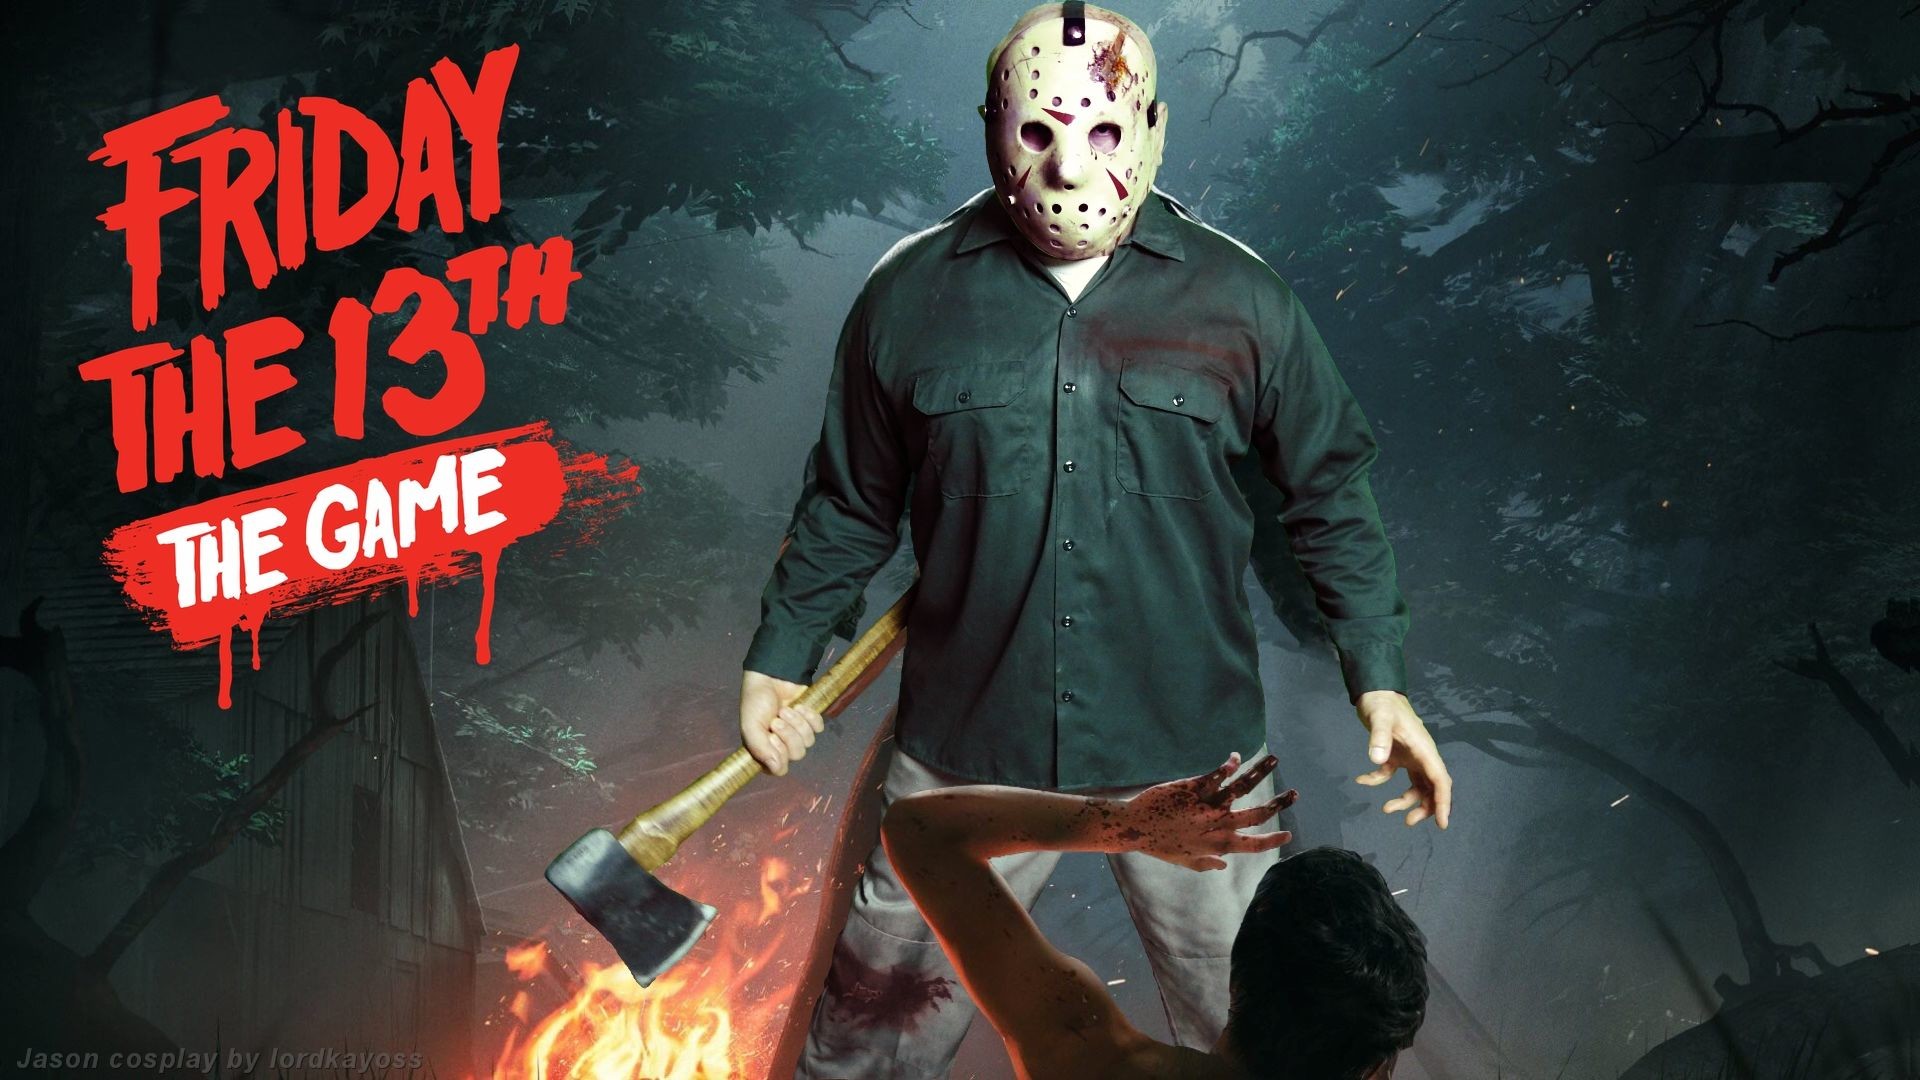 October's PlayStation Plus games include Friday the 13th and Laser League